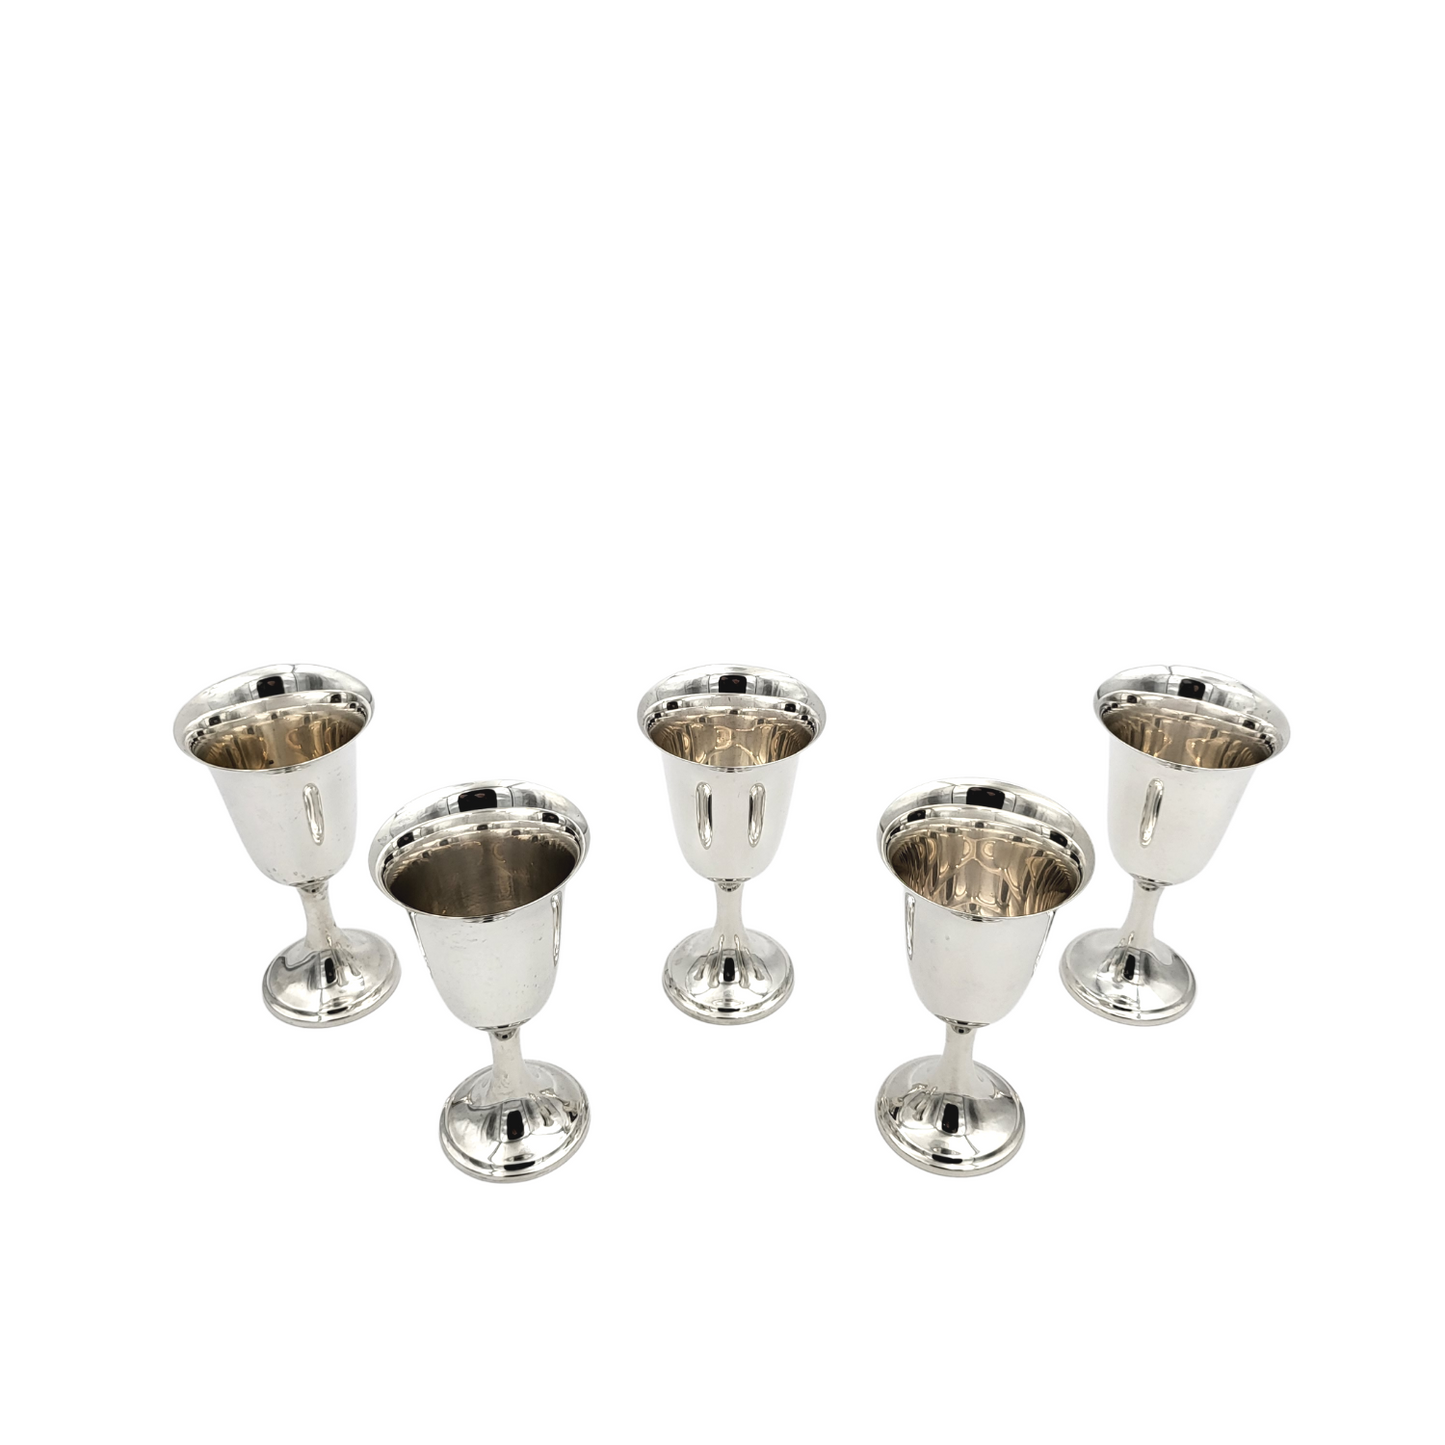 Coleman, Adler & Son Sterling Silver Goblets Made by Reed & Barton